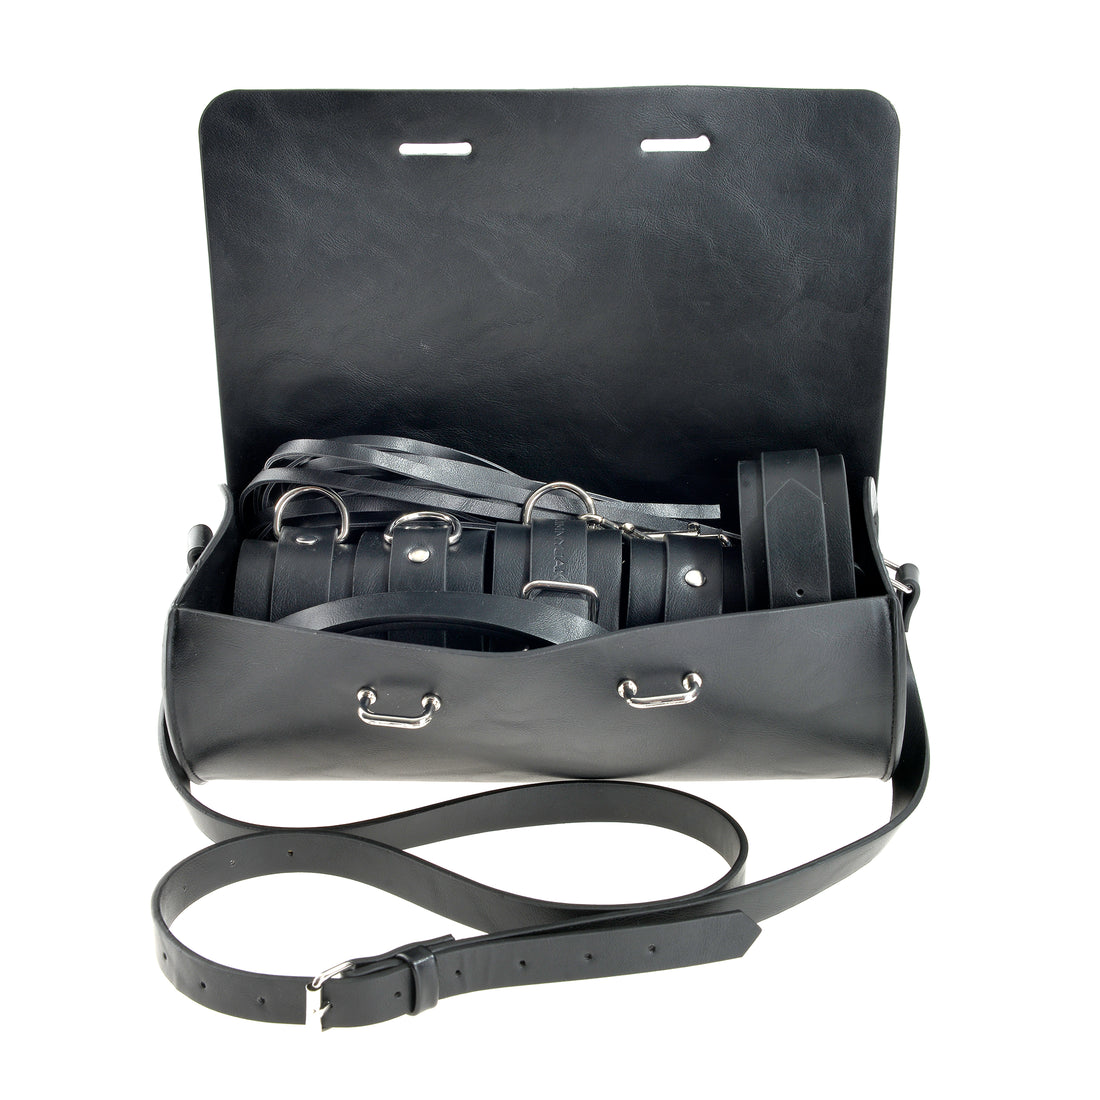 Front facing vegan leather carrying case with bondage items black